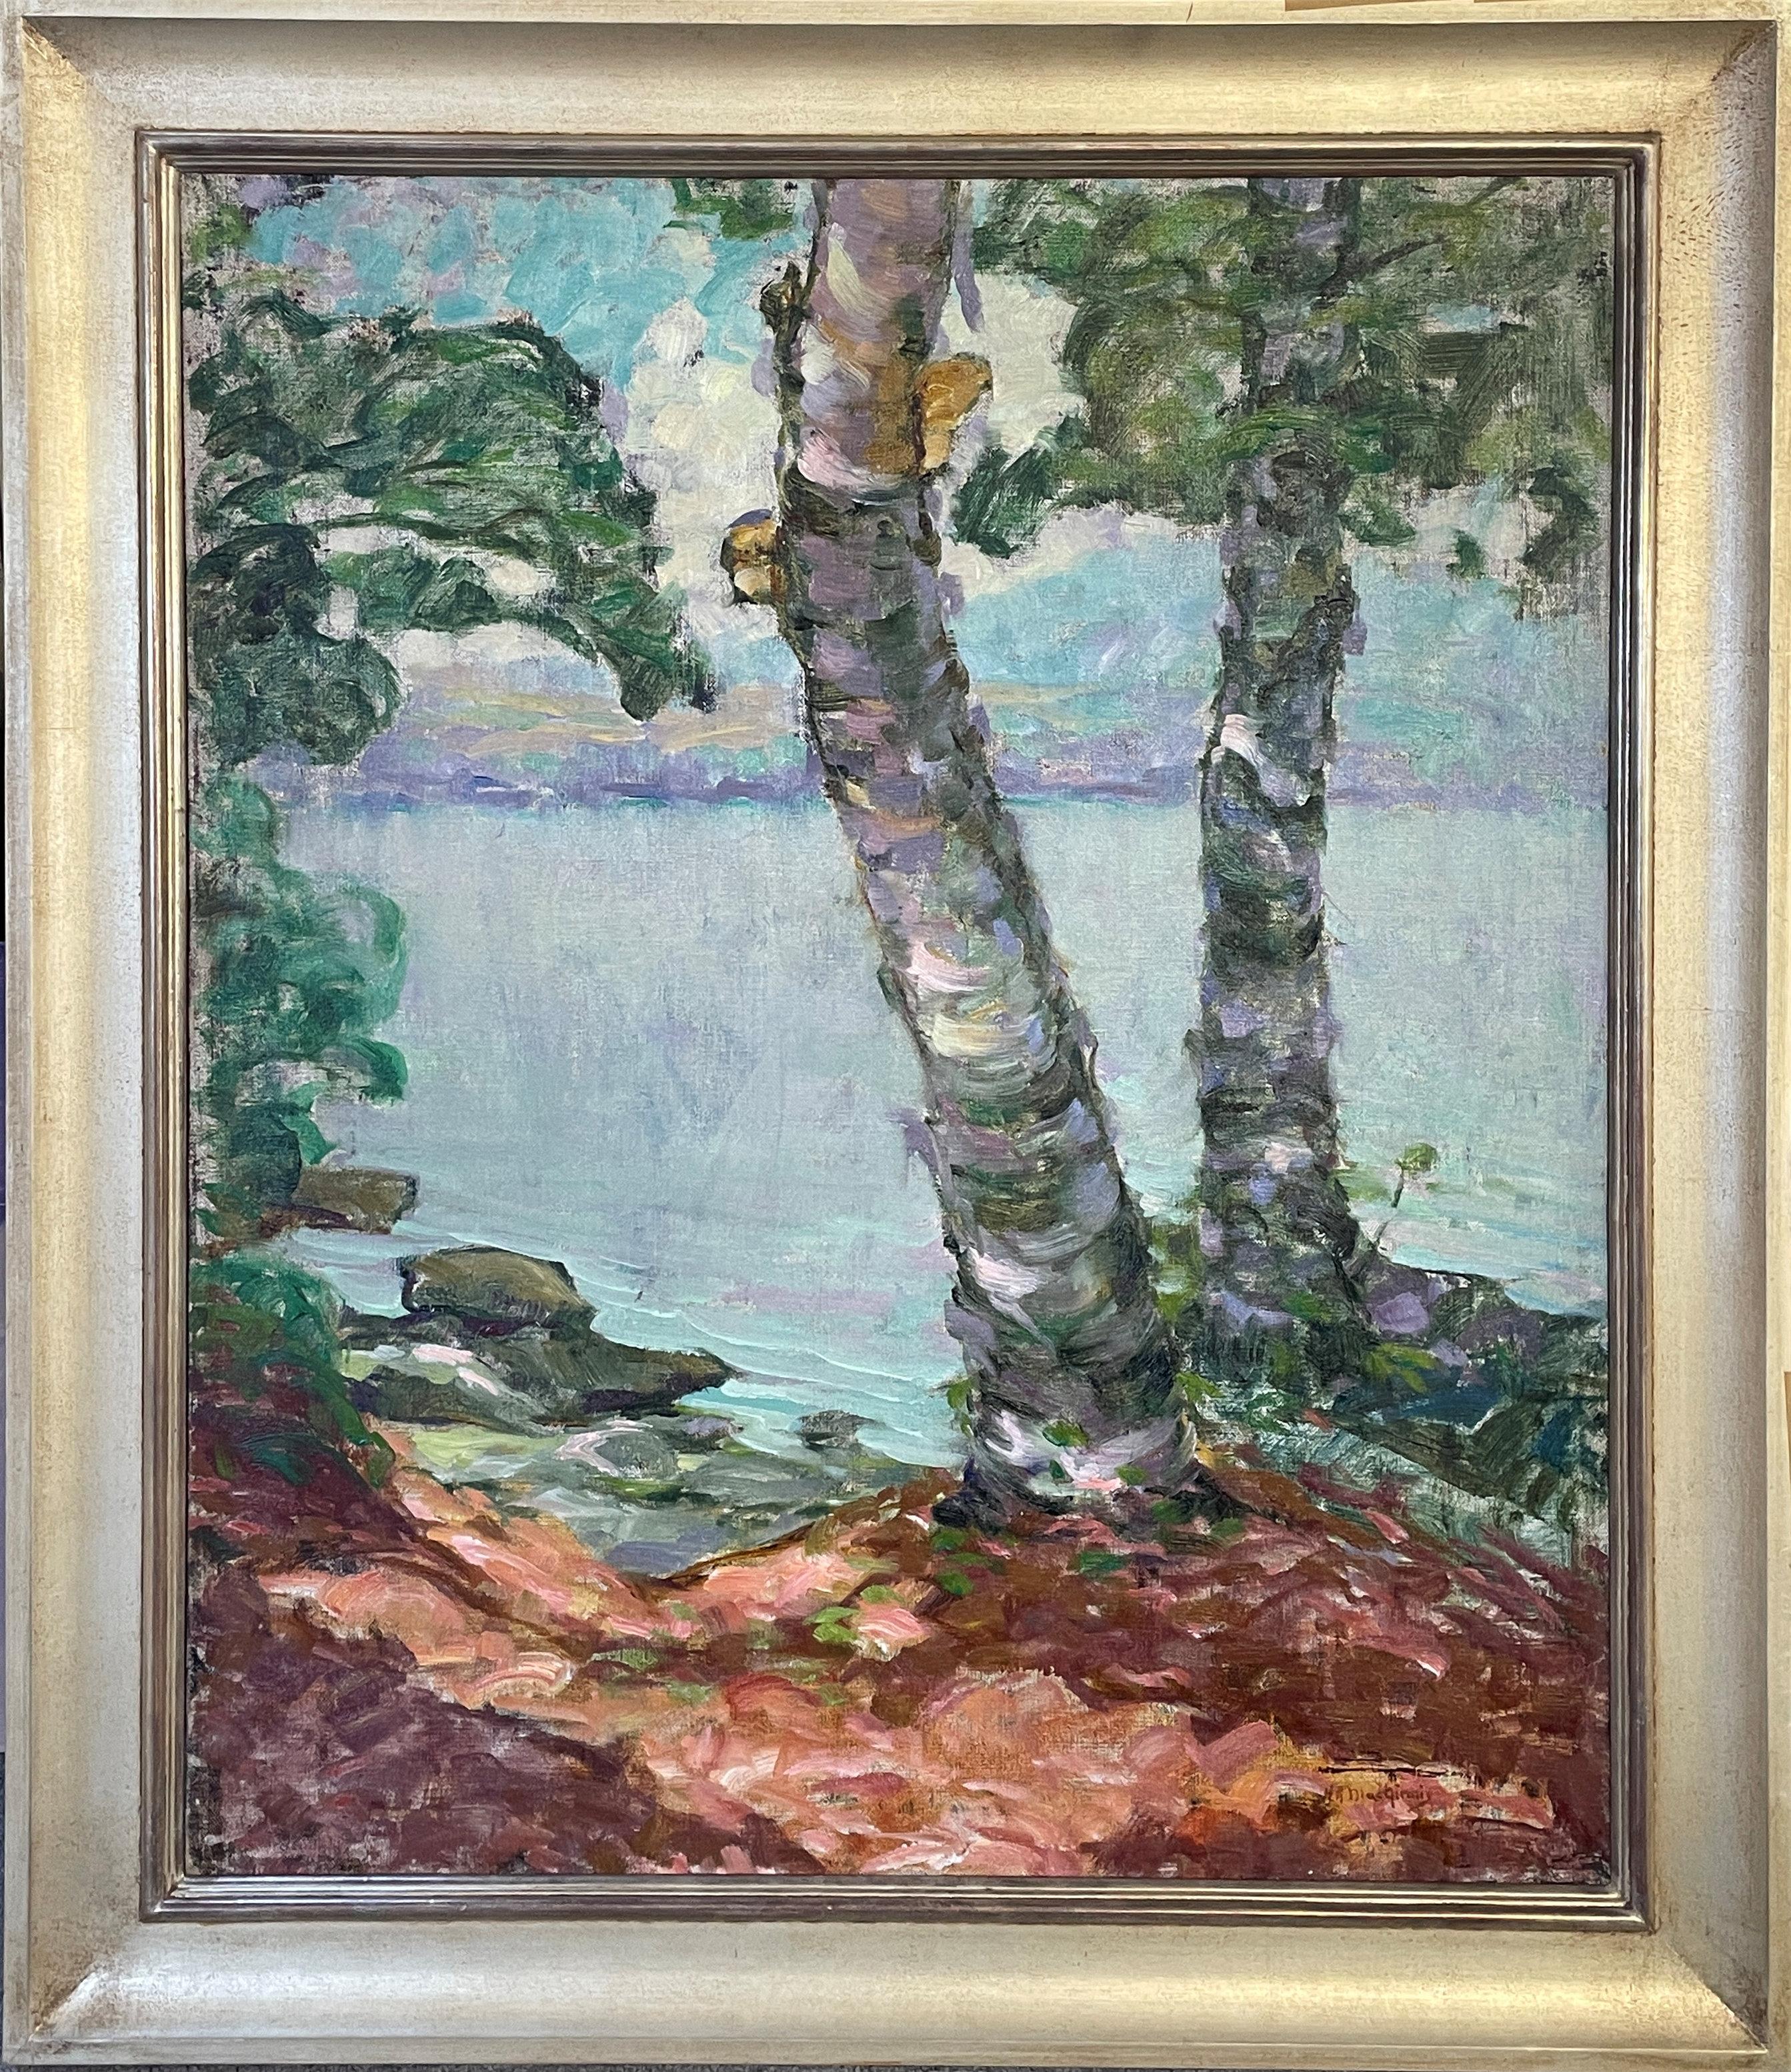 Henry MacGinnis, (1875 - 1962)
Baker Pond, New Hampshire, 1930
Oil on canvas
30 x 25 inches
Signed lower right

Henry Ryan MacGinnis, 1875-1962, was born in Indiana and began his art studies under the eminent Hoosier artists T.C. Steele, J.O. Adams